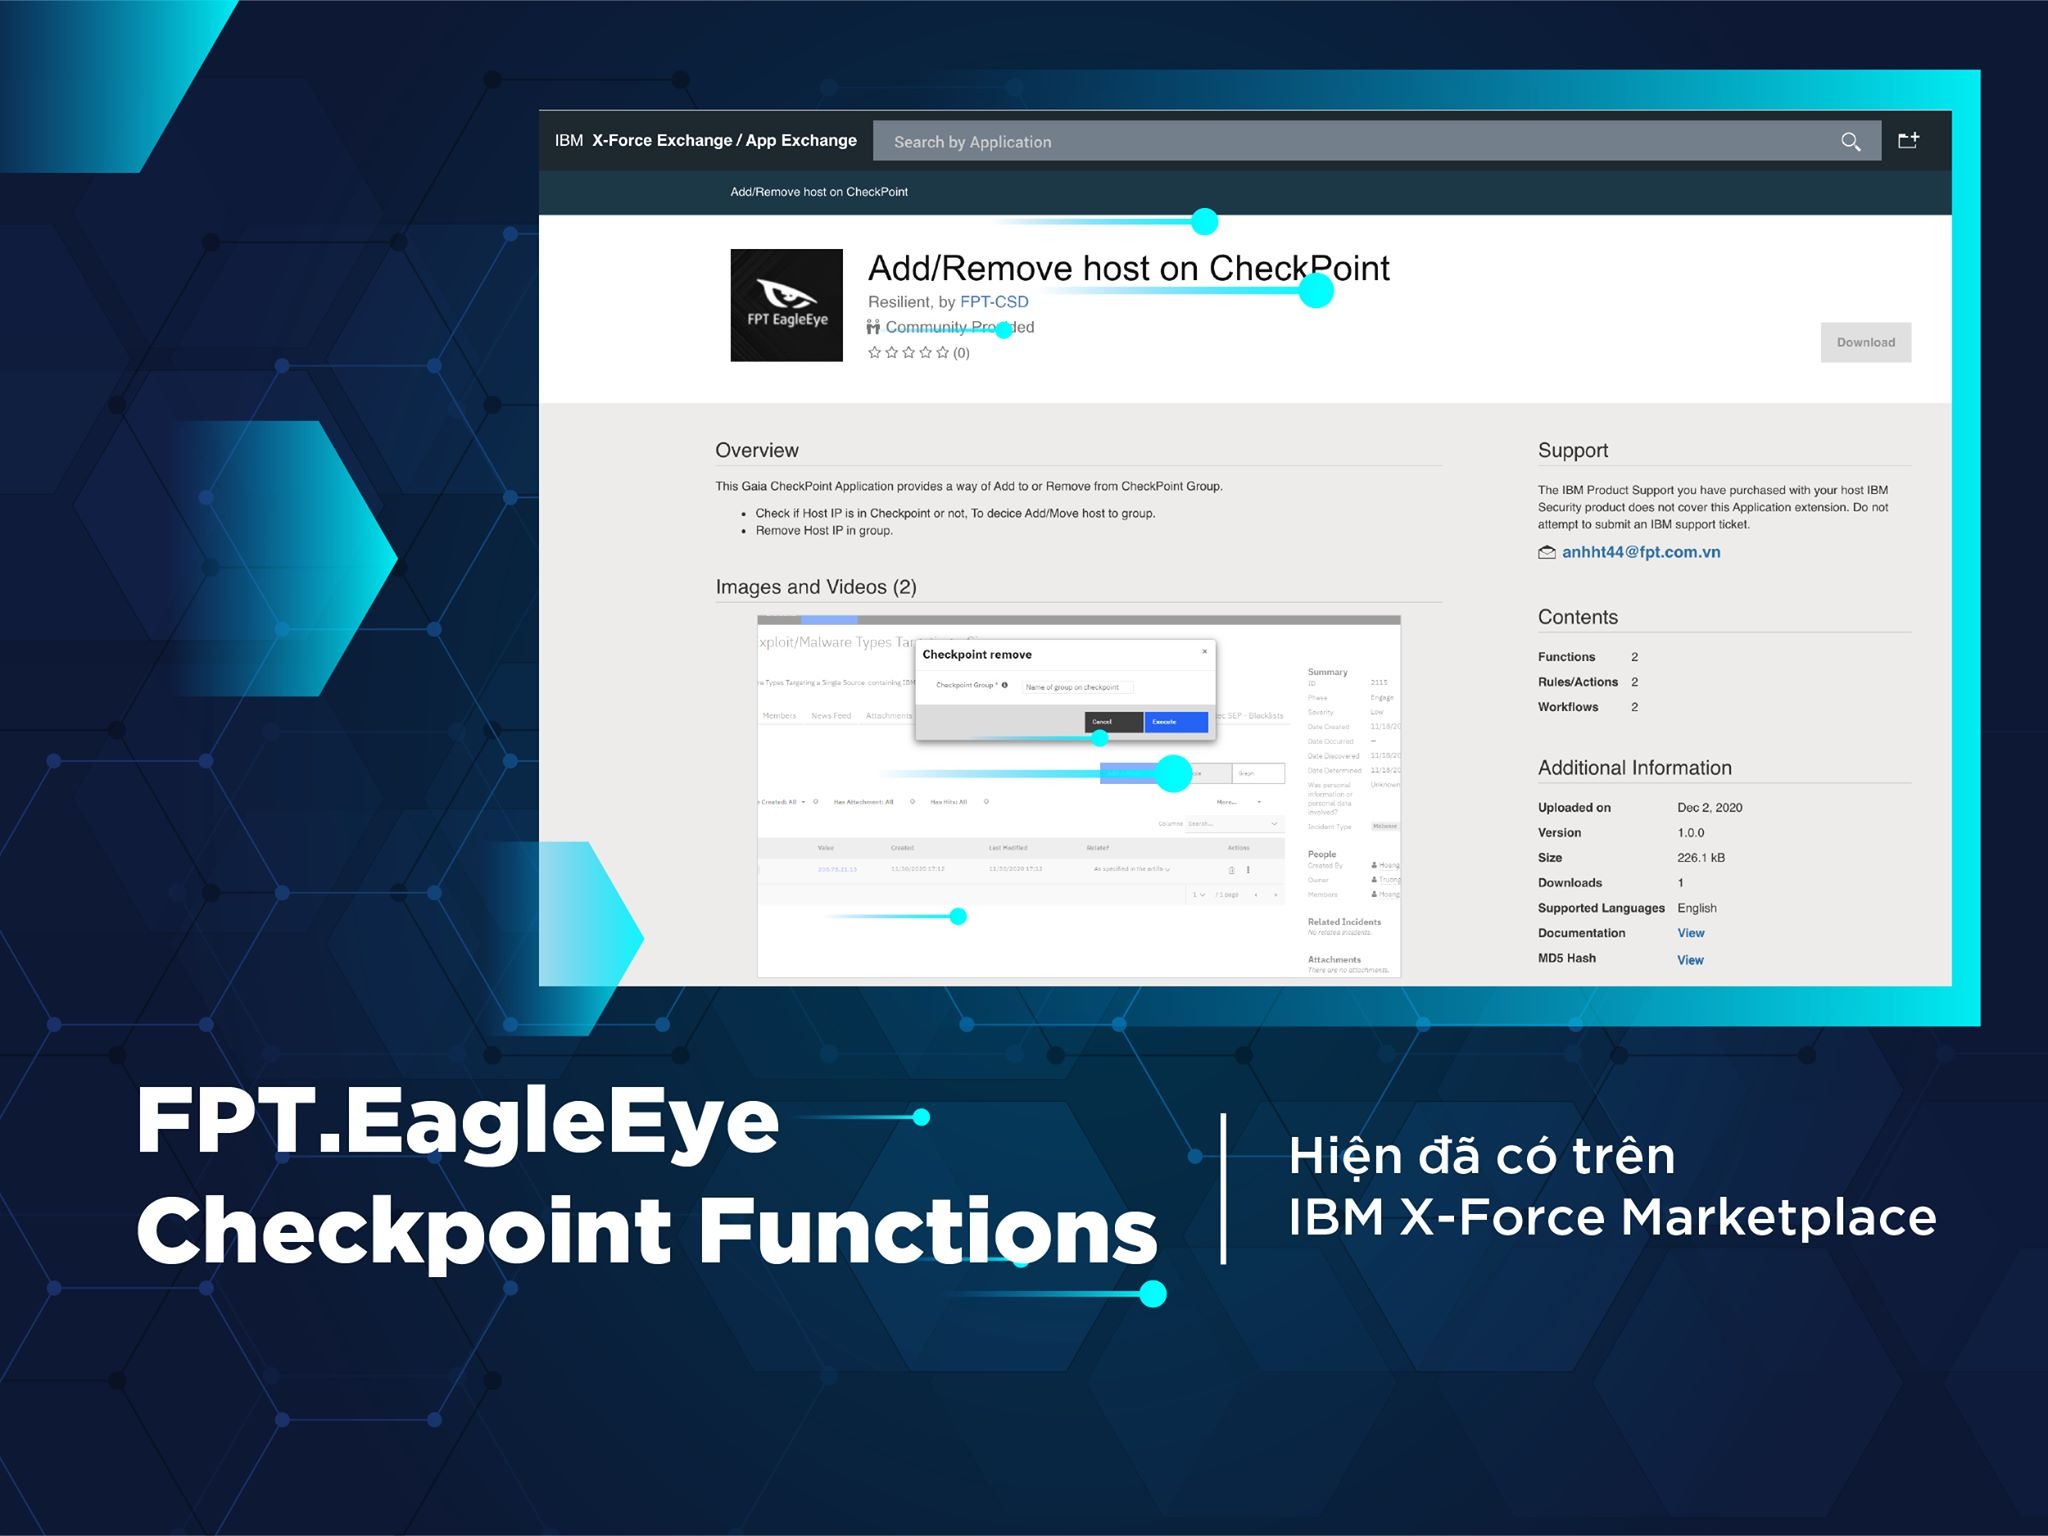 FPT.EagleEye Checkpoint Functions is Vietnam’s first security product listed on the IBM X-Force Marketplace